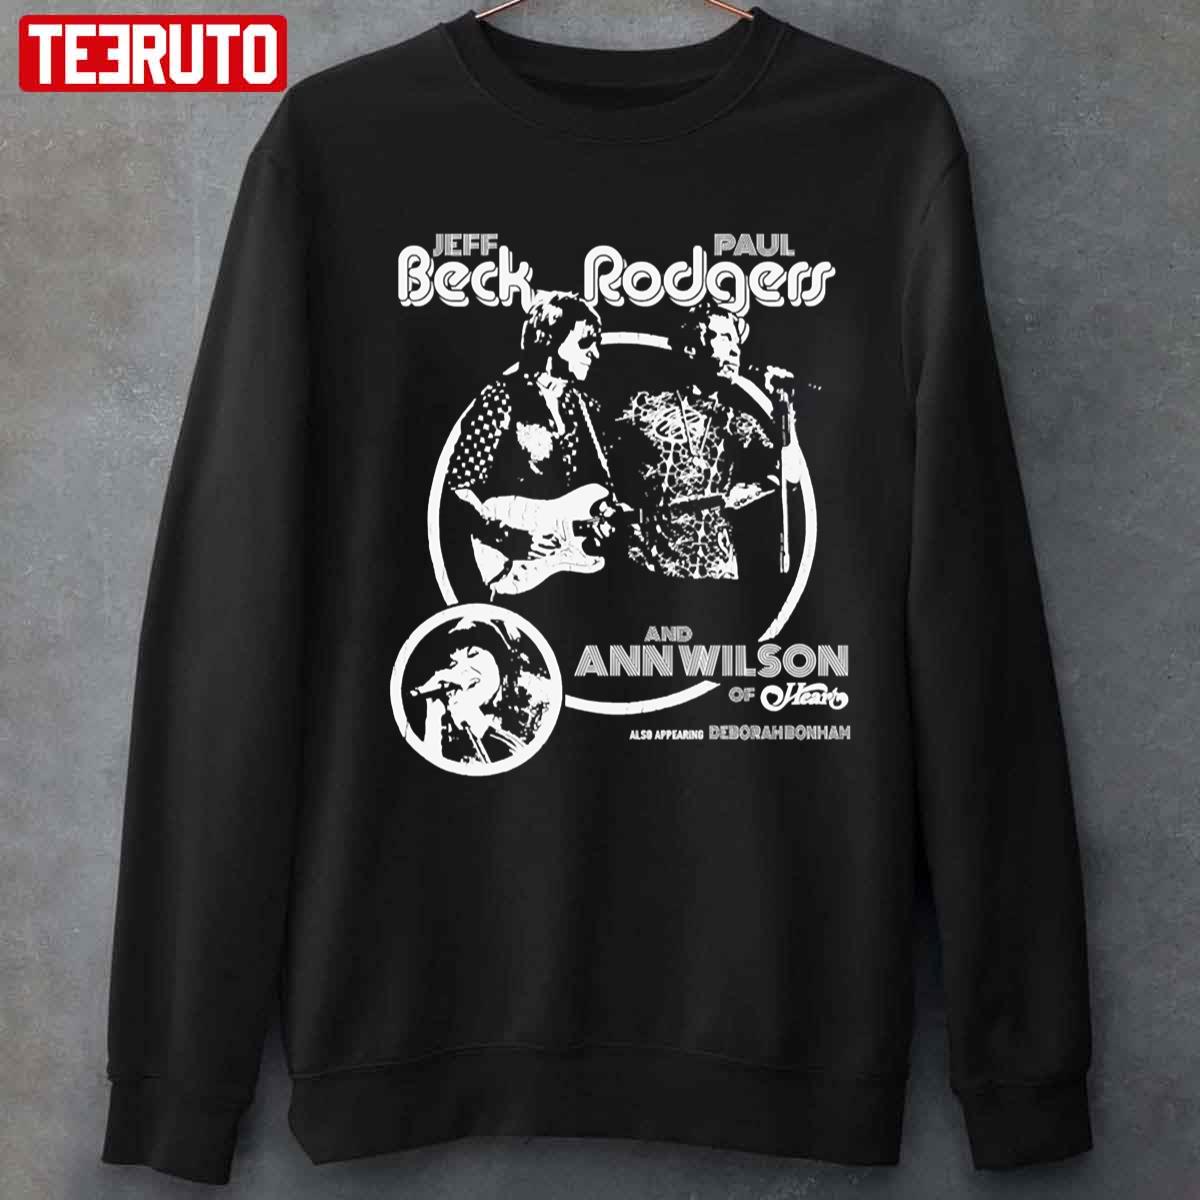 Jeff Beck Paul Rodgers In Concert Unisex T-Shirt